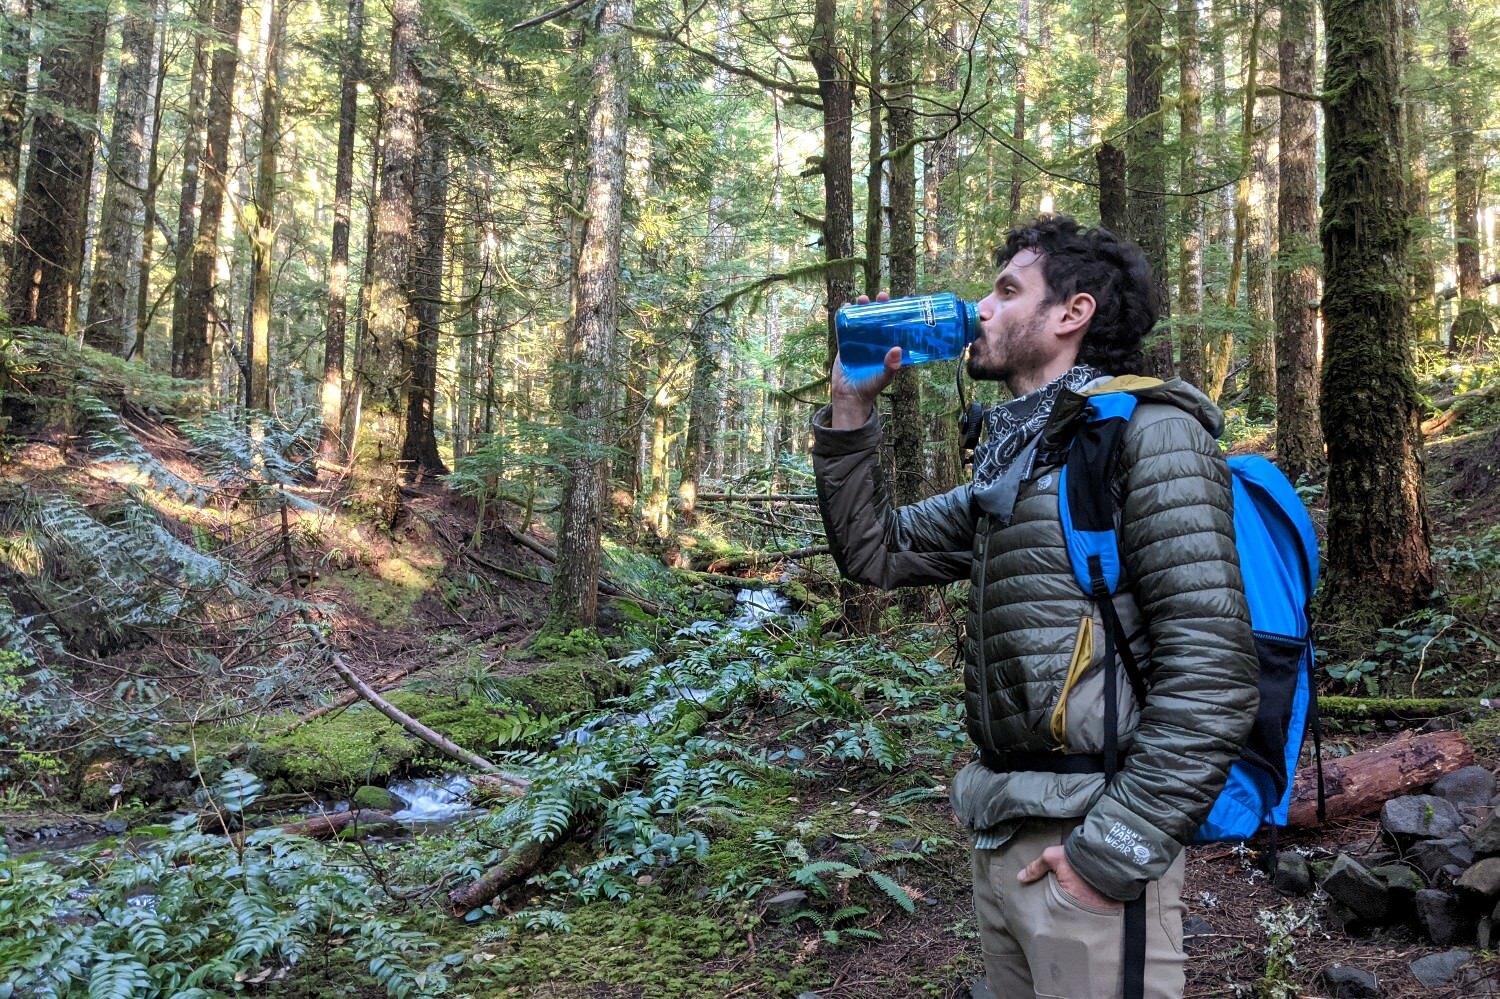 A hiker standing in a forest drinking water from a Nalgene - theyre wearing the Six Moon Designs Wyeast daypack